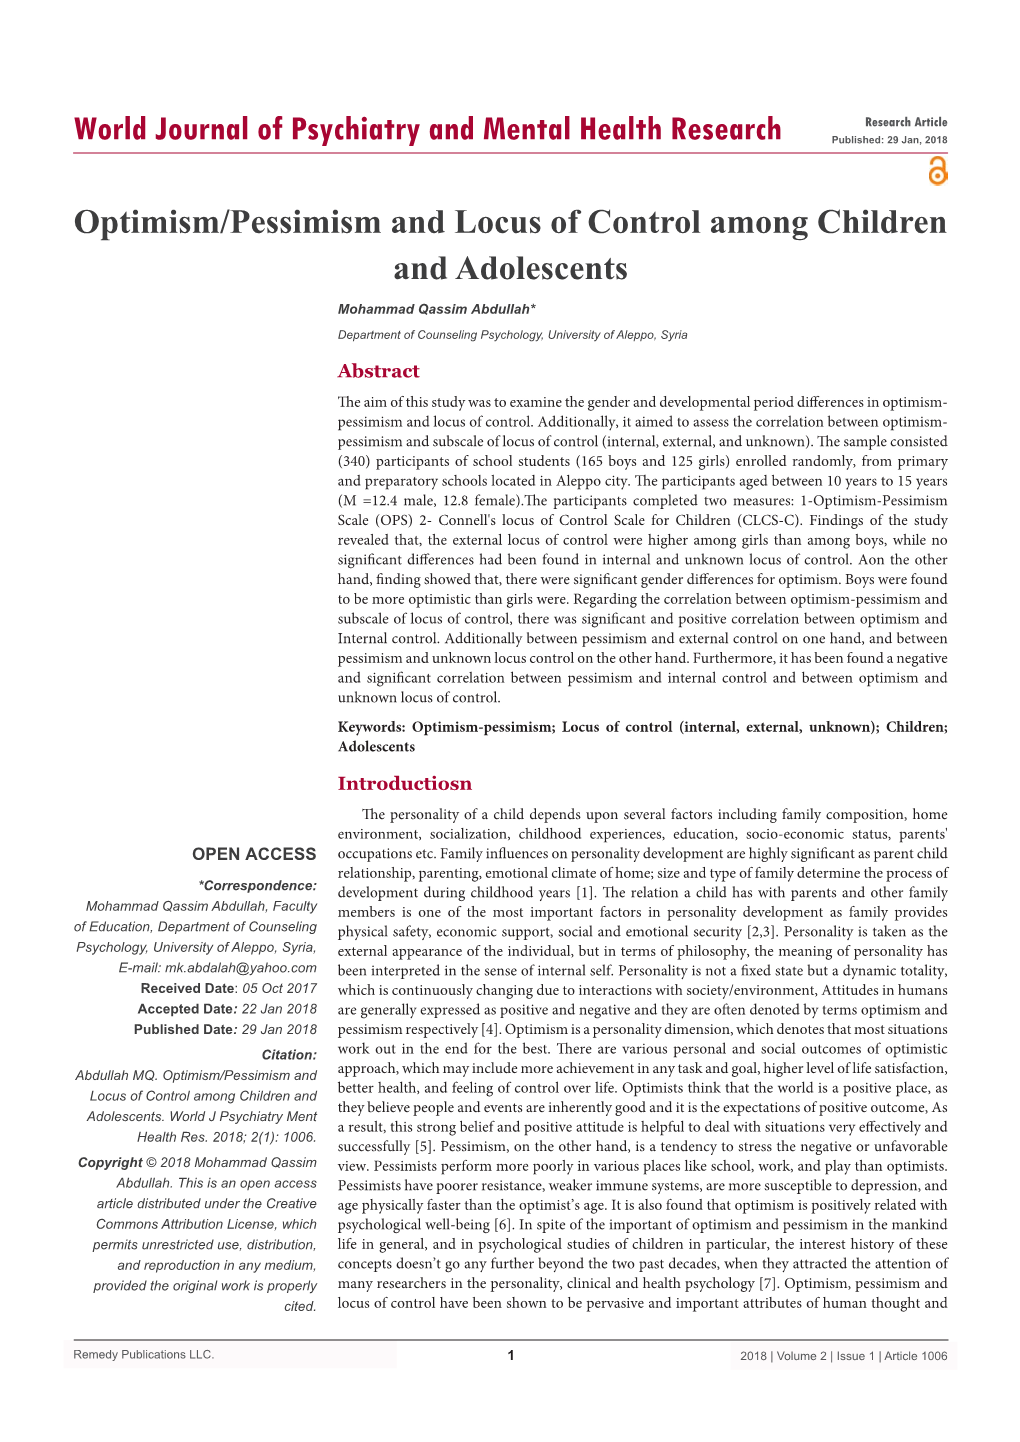 Optimism/Pessimism and Locus of Control Among Children and Adolescents